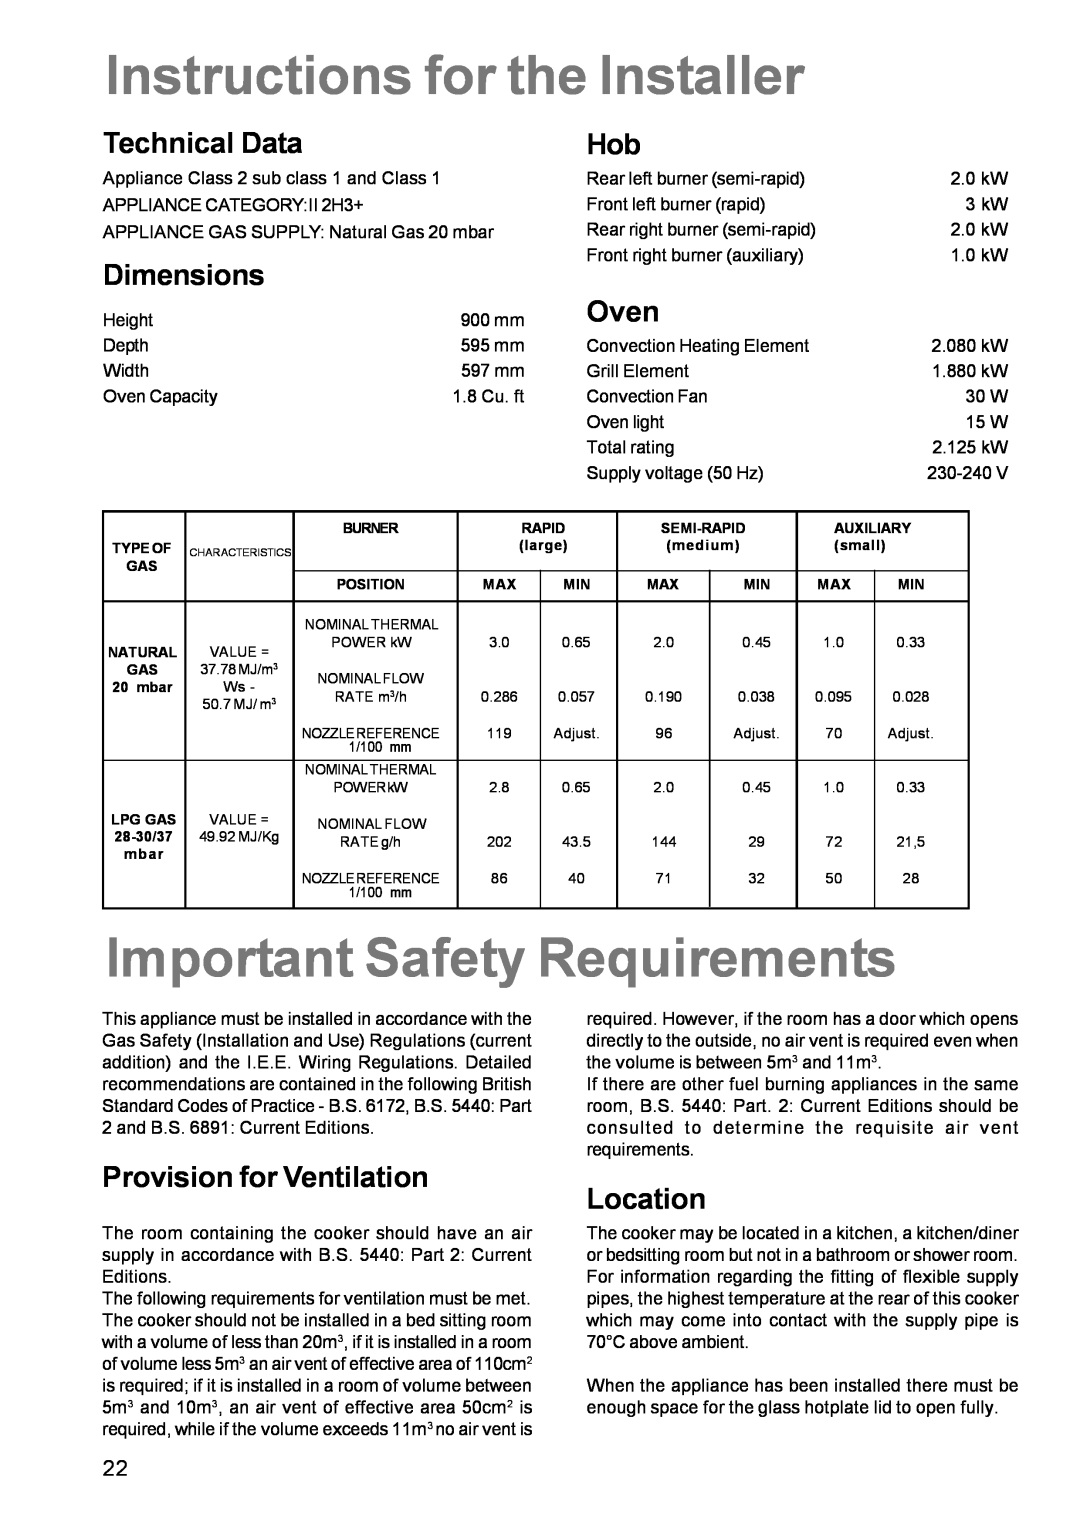 Zanussi ZCM 610 Instructions for the Installer, Important Safety Requirements, Technical Data, Dimensions, Oven, Location 